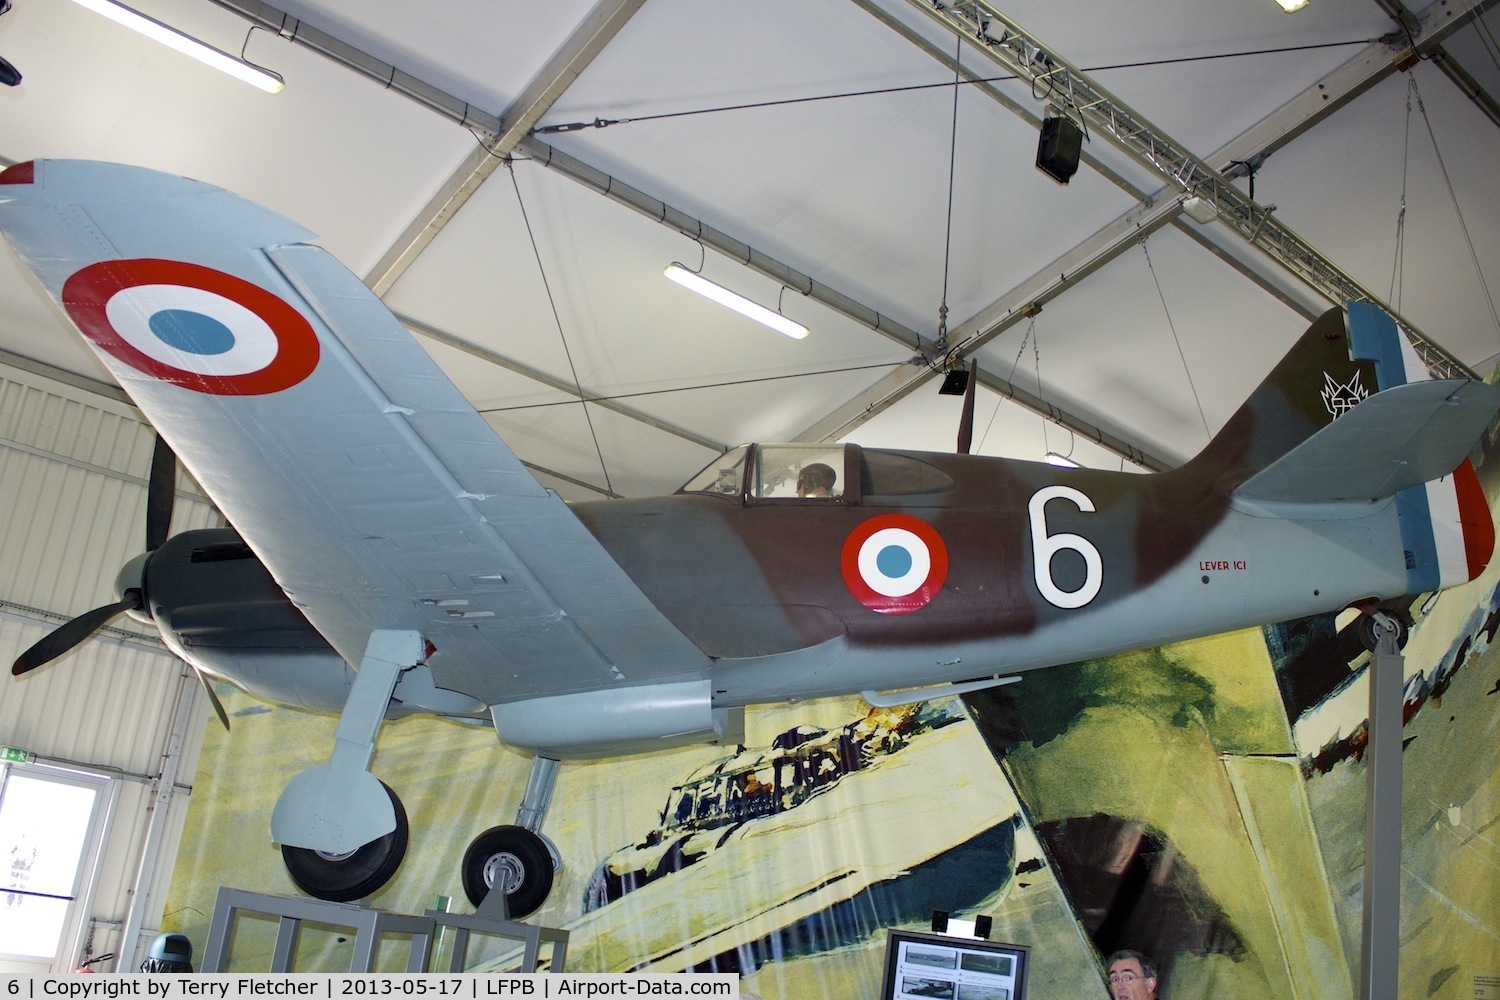 6, Dewoitine D.520 C/N 862, Exhibited at The Air & Space Museum at Le Bourget , Paris, France